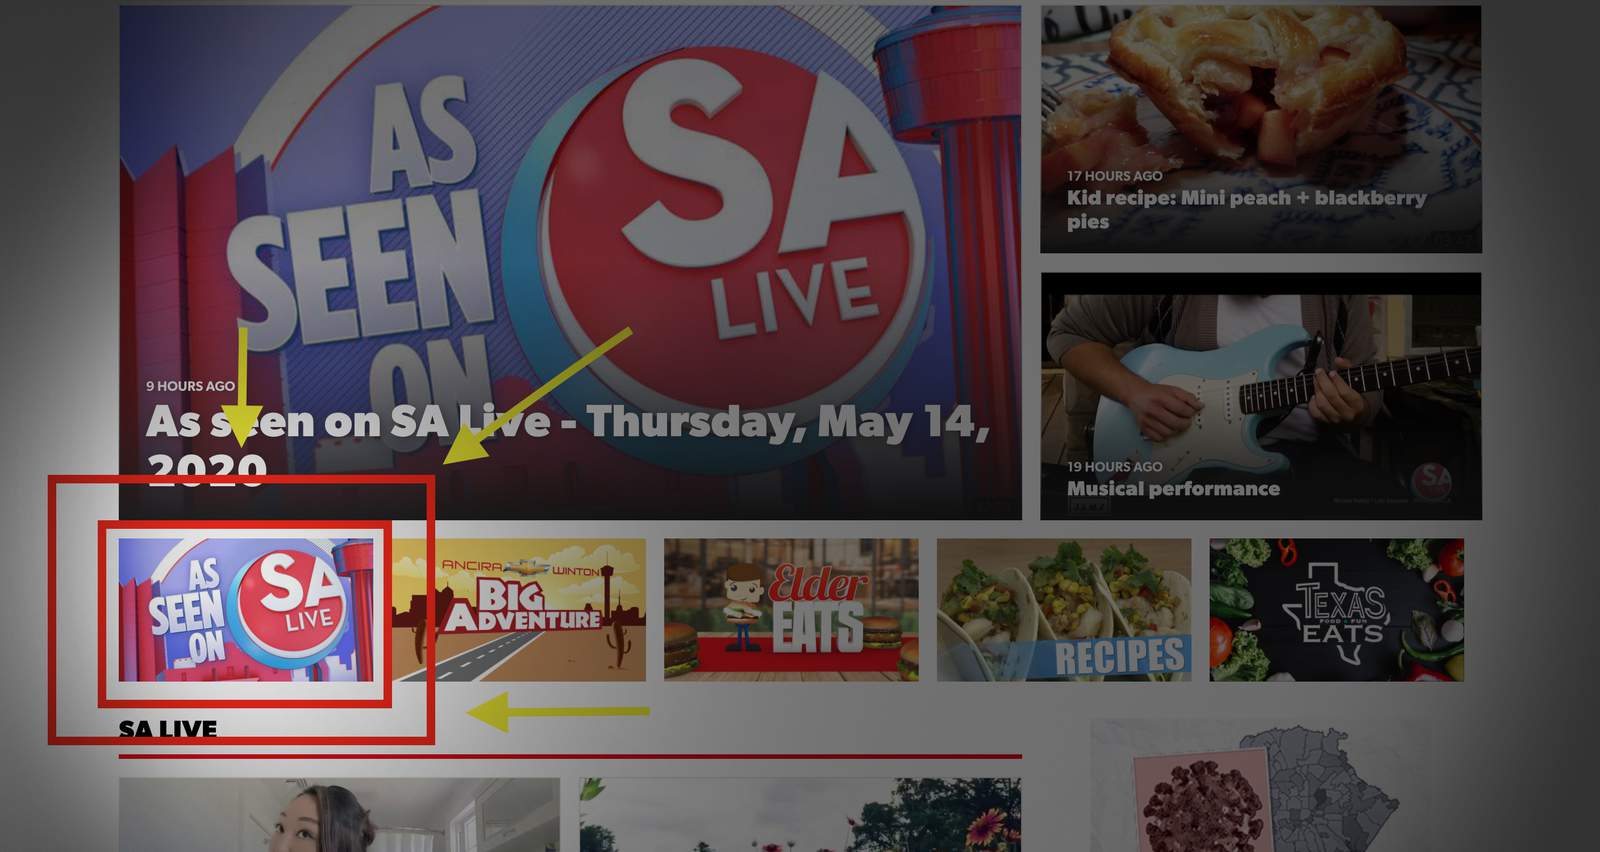 What is ‘As seen on SA Live’?